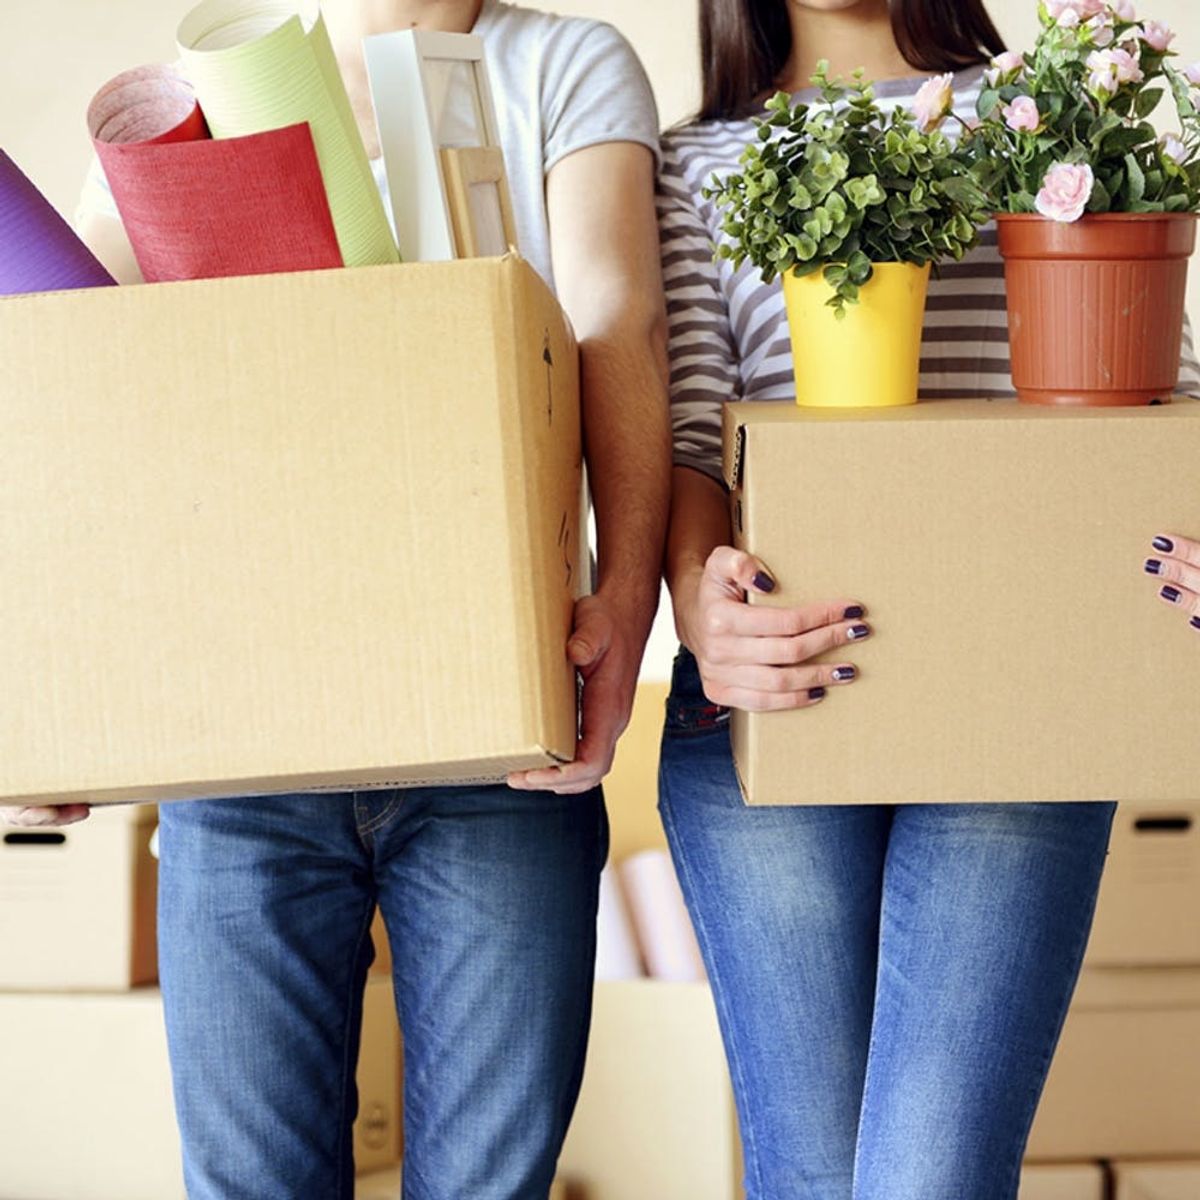 This Is the Legal Doc You May Want to Sign If You Plan to Move In Together